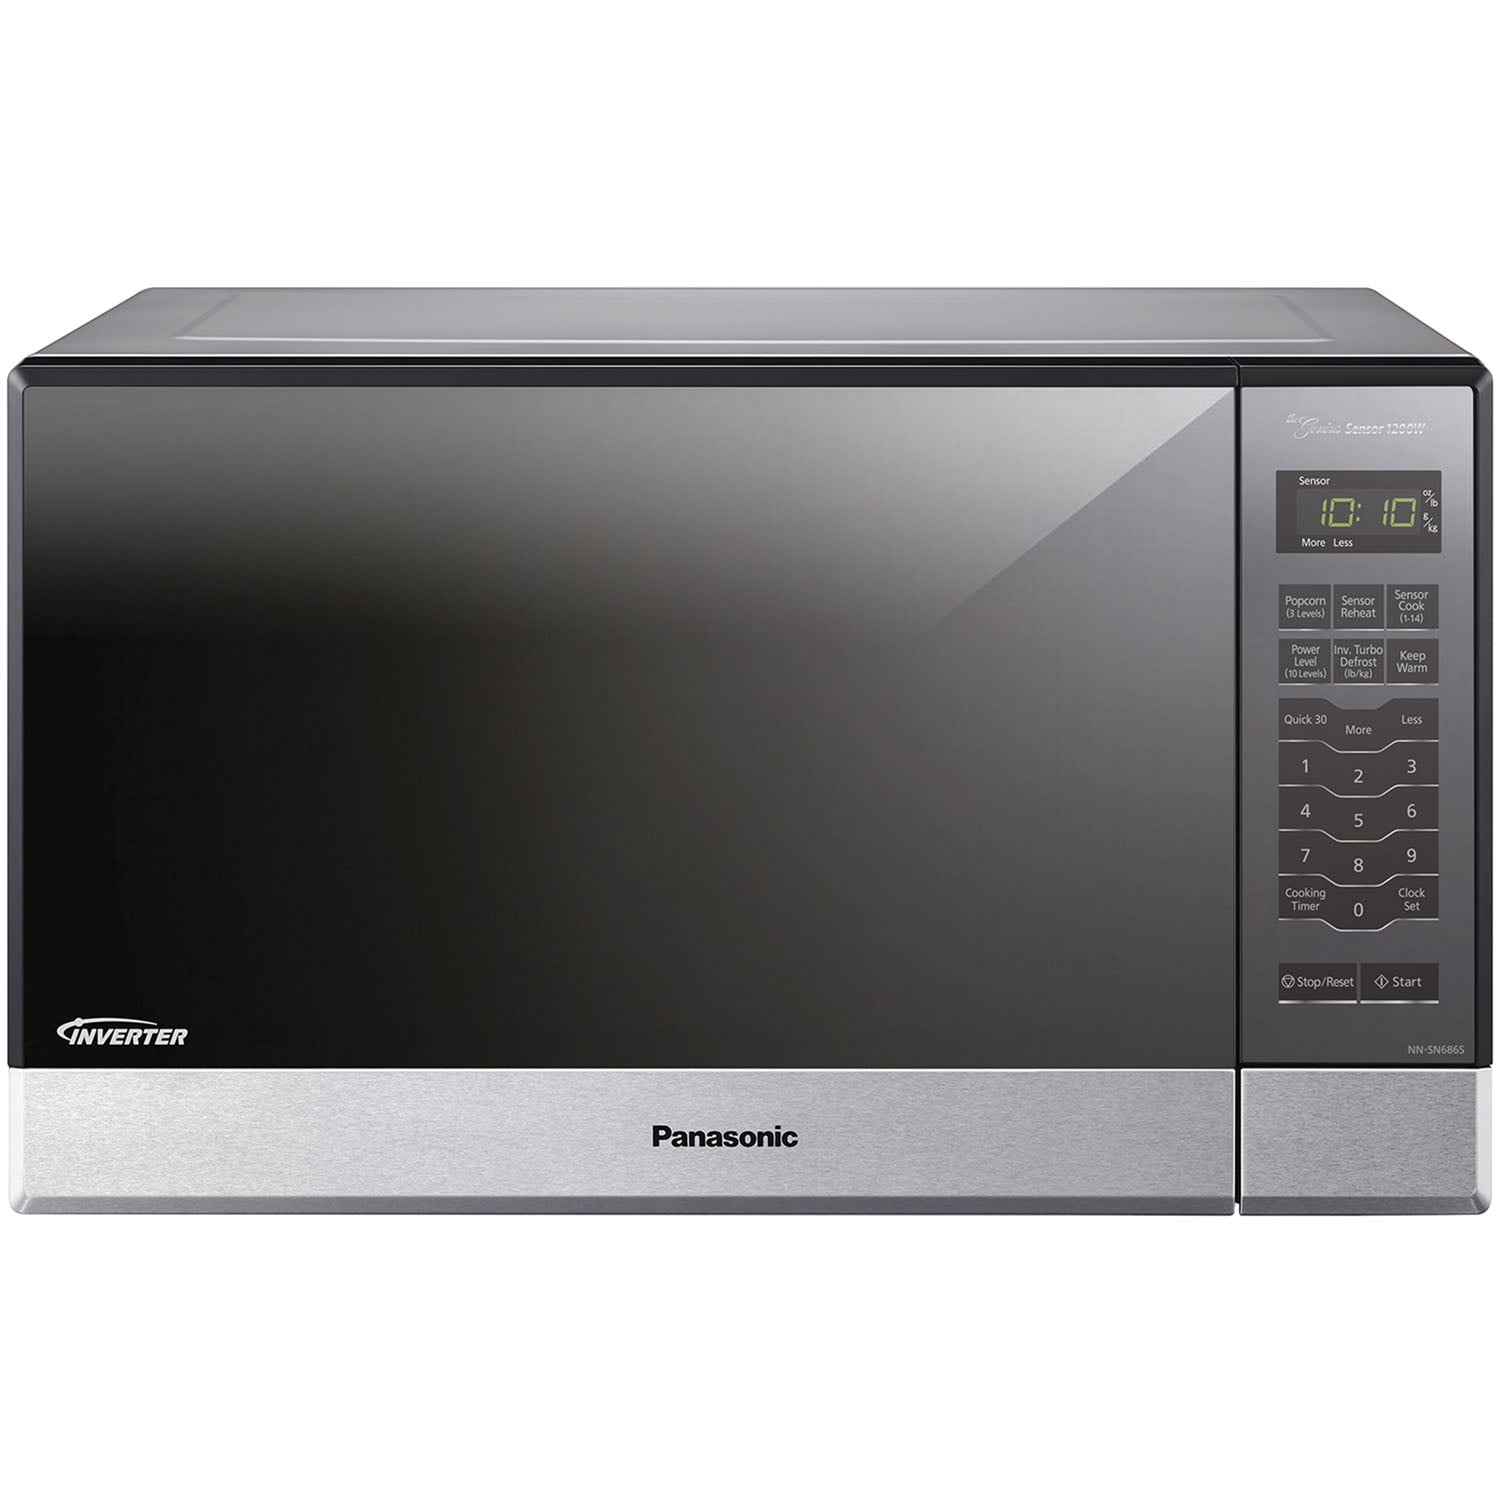 Picture of Panasonic NN-SN686SR 1.2 Cu. Ft. 1200 watt Built-In Countertop Microwave Oven with Inverter Technology Stainless Steel